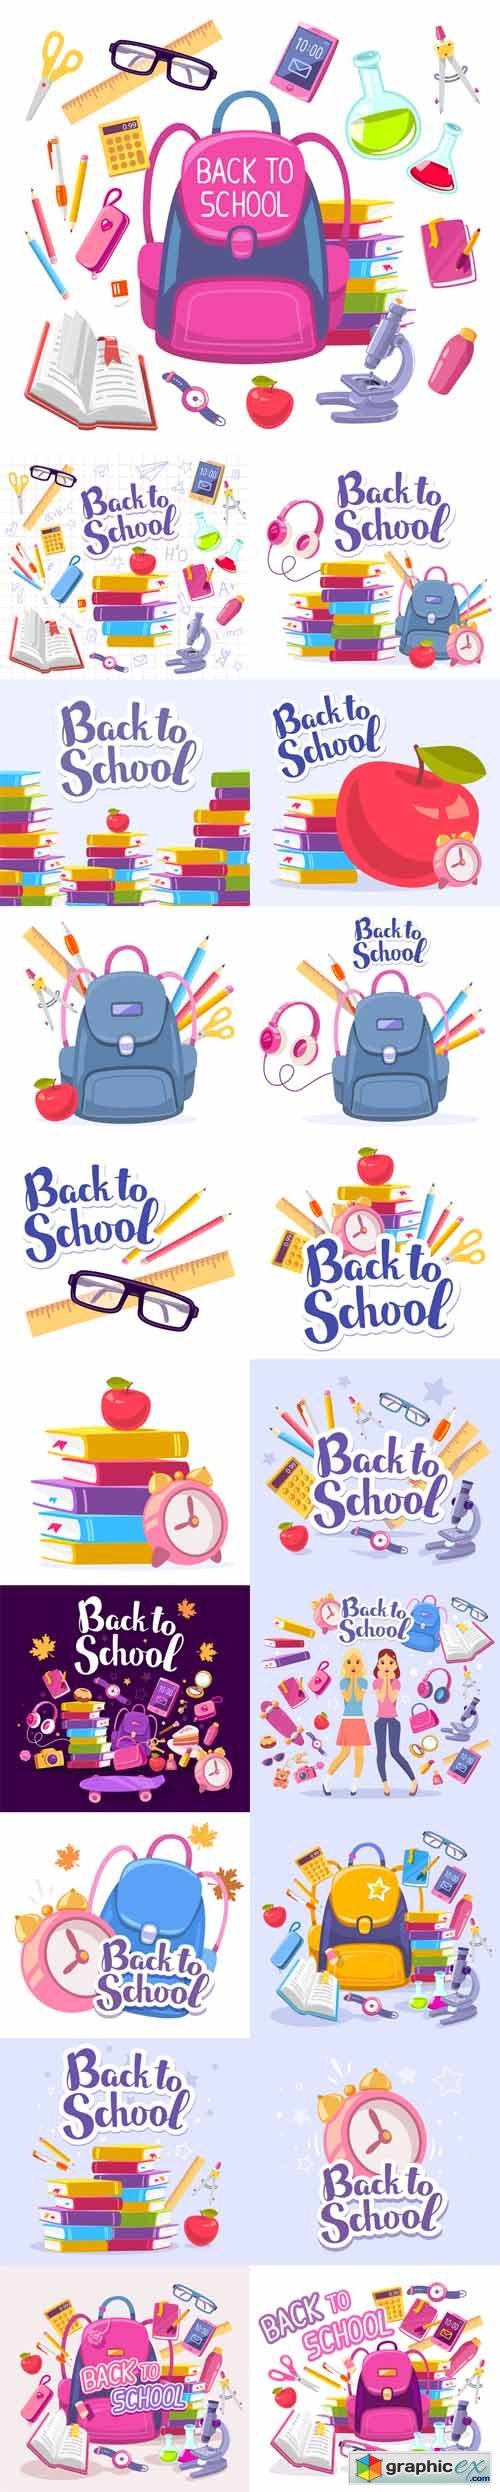 Colorful Illustration of Inscription Back to School